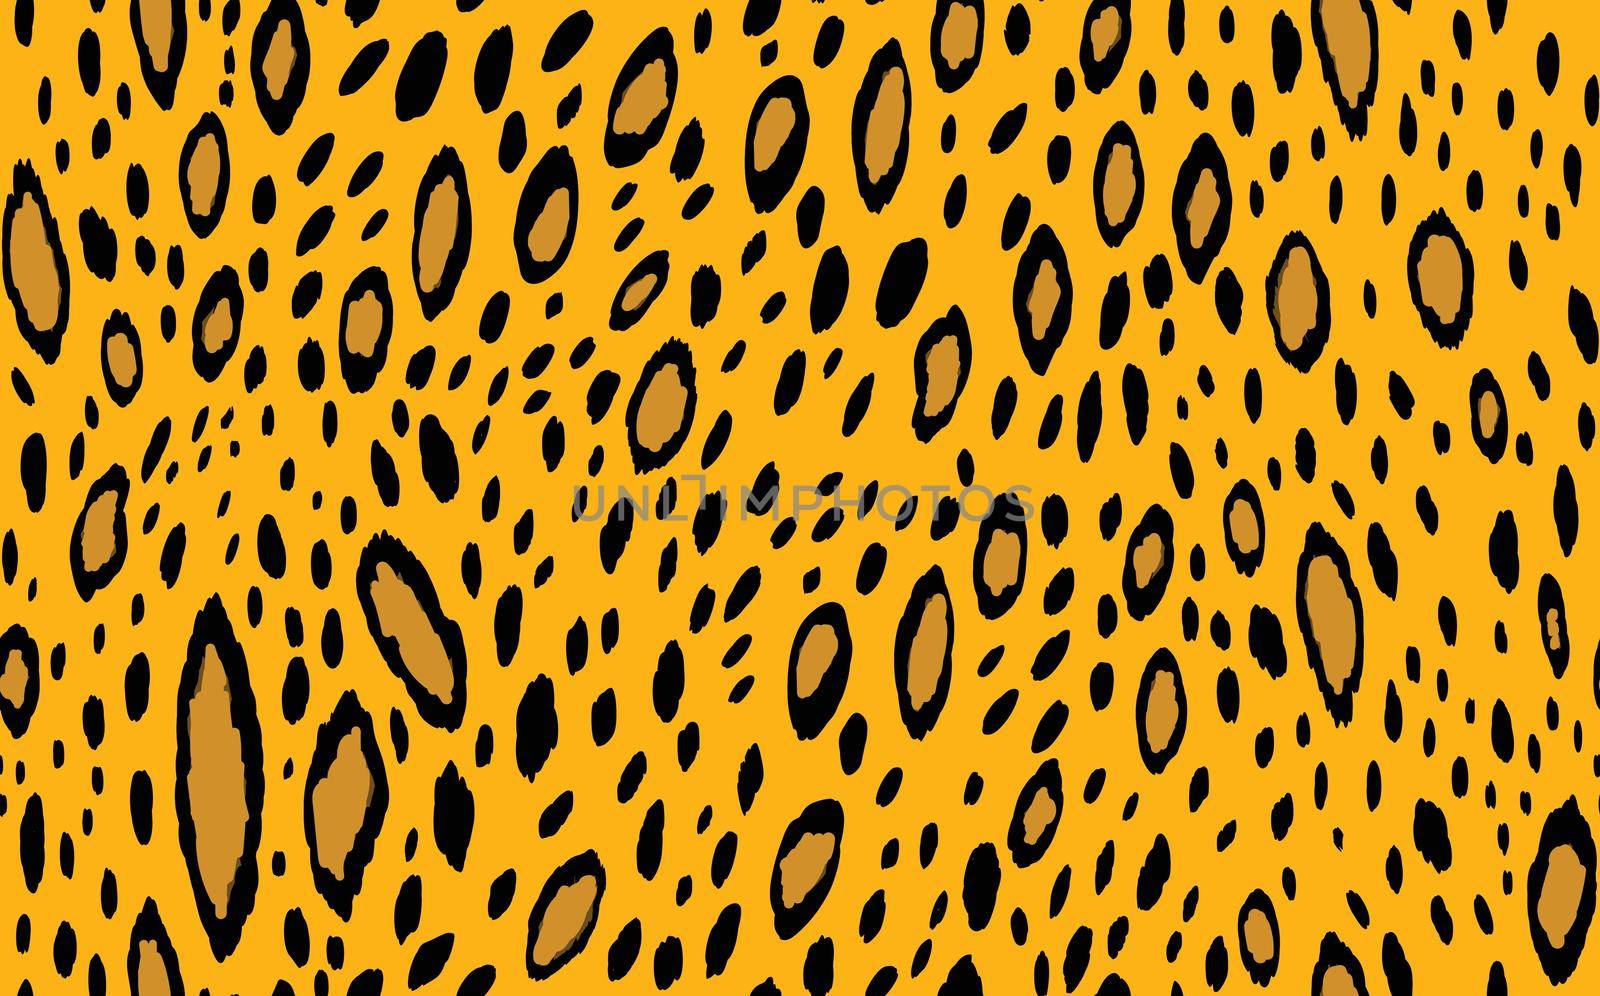 Abstract modern leopard seamless pattern. Animals trendy background. Orange and black decorative vector stock illustration for print, card, postcard, fabric, textile. Modern ornament of stylized ski by allaku